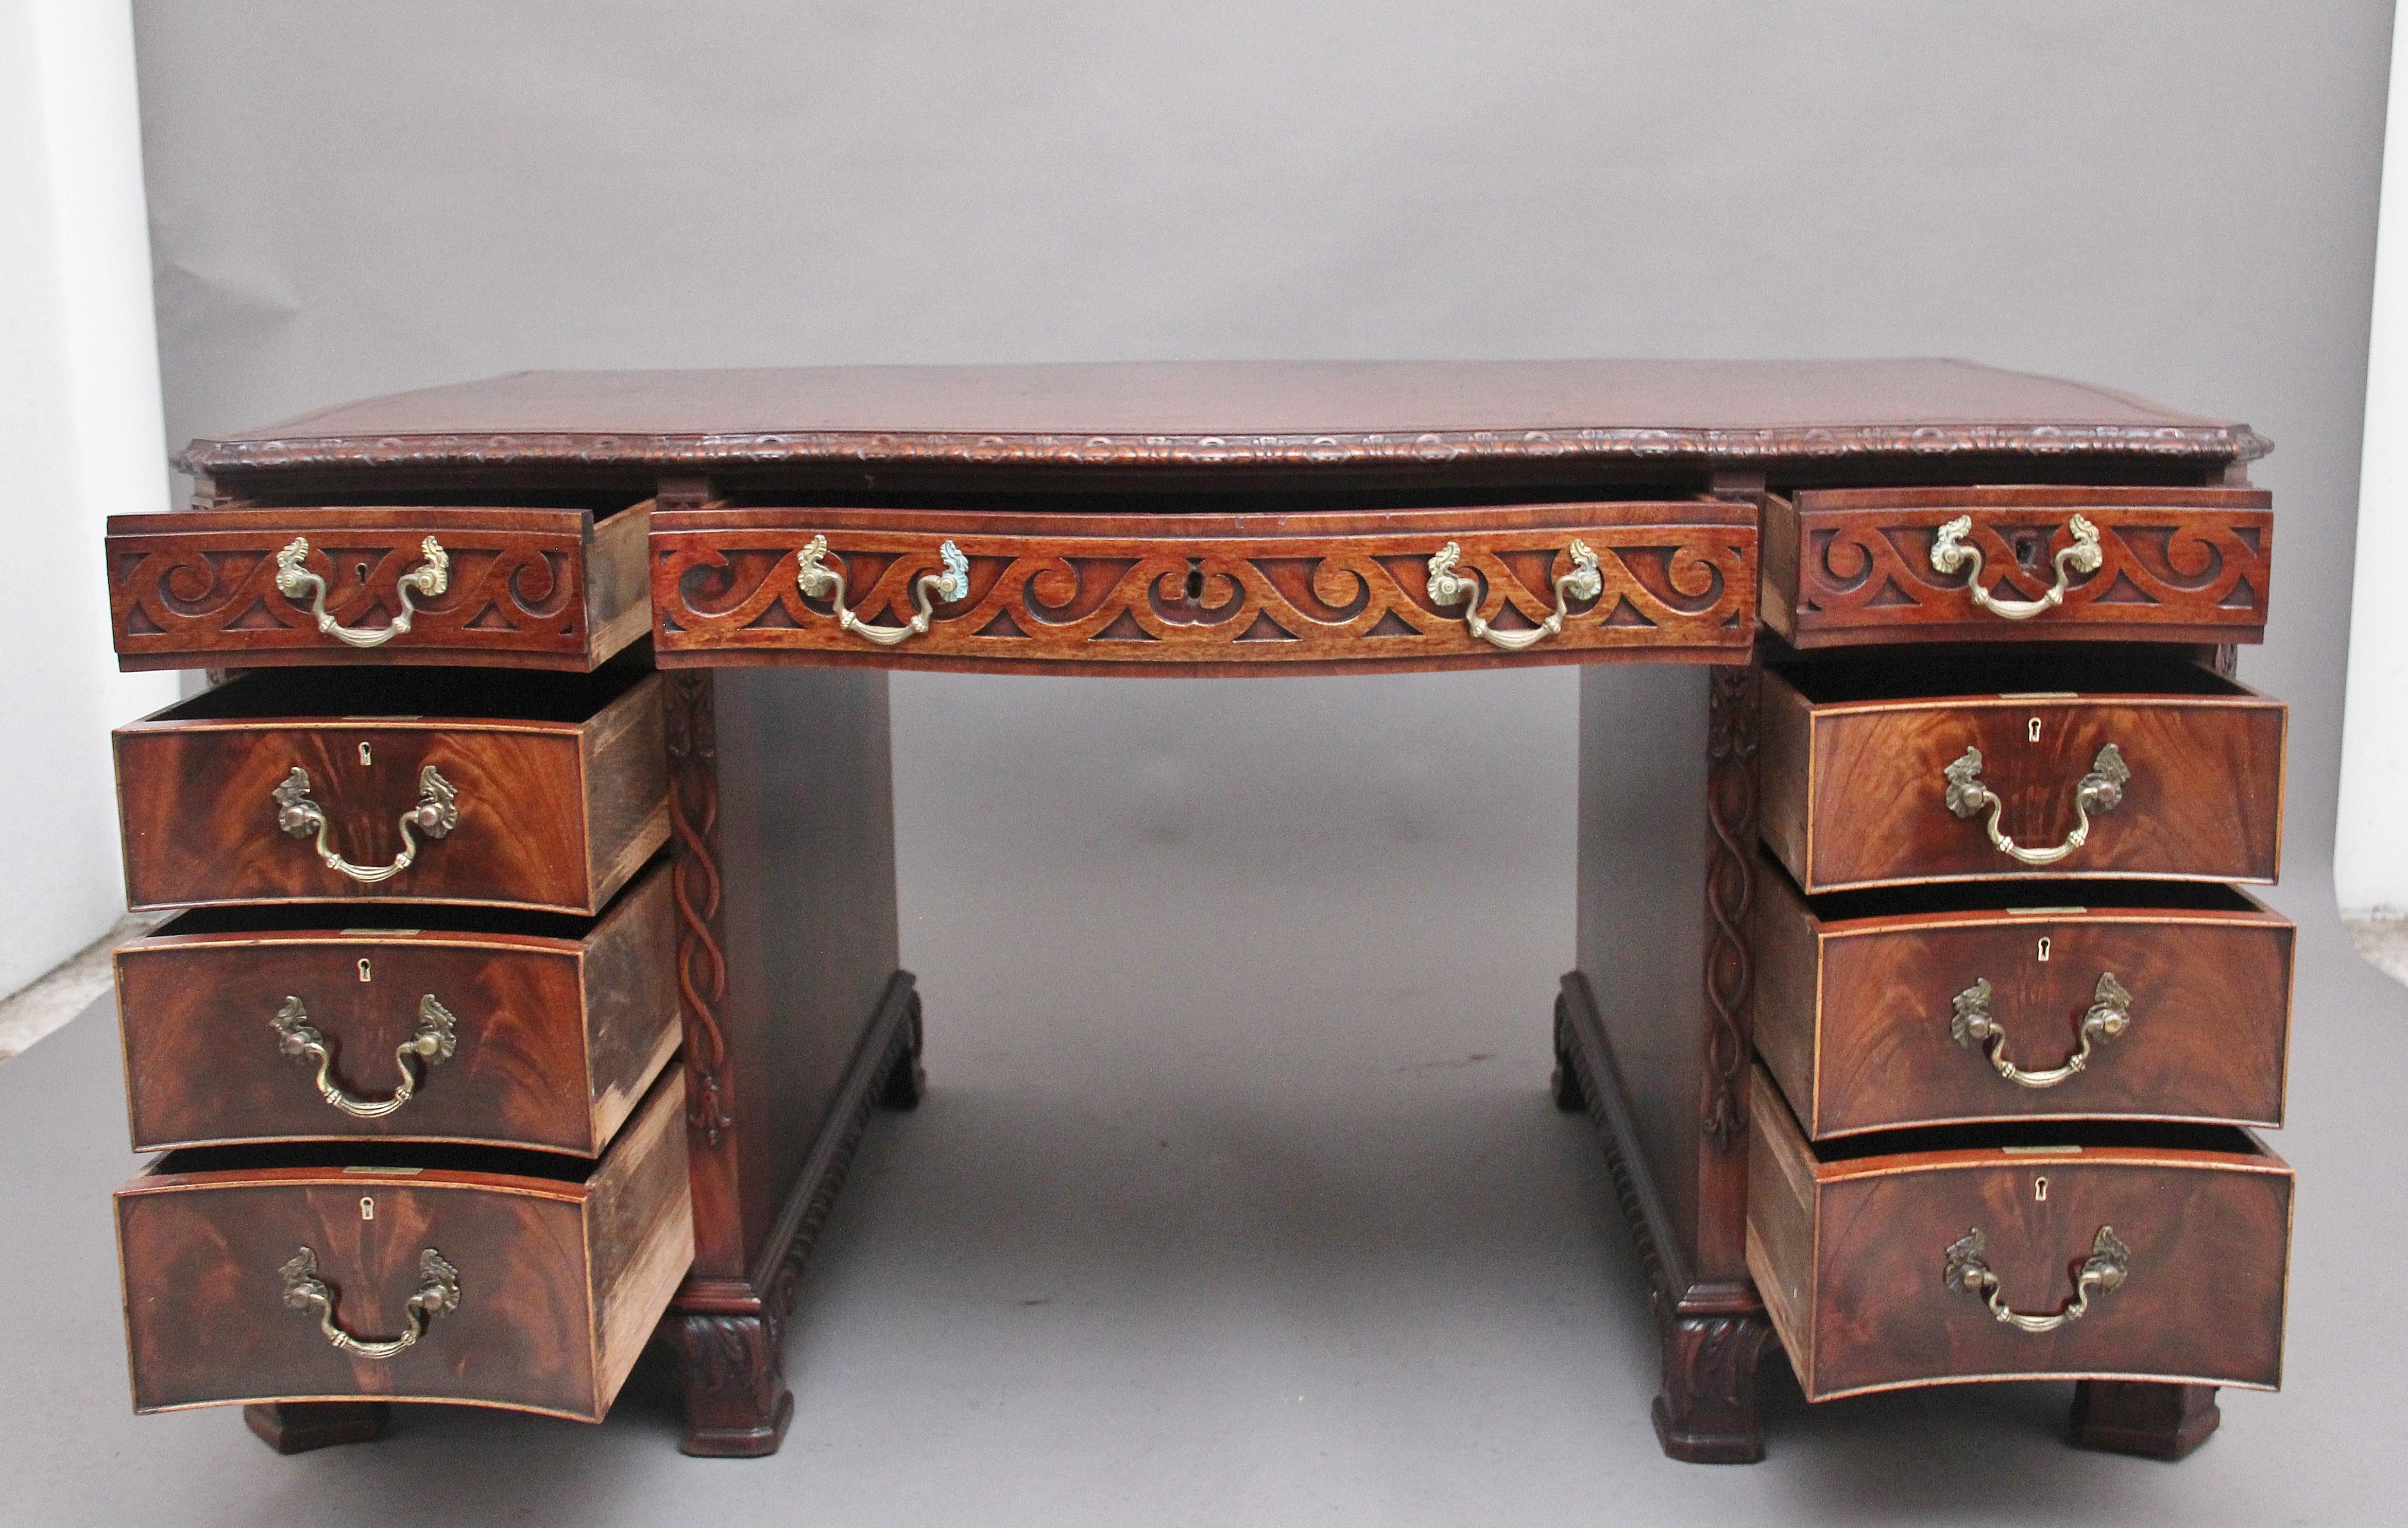 Superb quality early 20th Century mahogany pedestal serpentine desk in the Chippendale style, the finely carved moulded edge top having a tobacco coloured leather writing surface decorated with blind tooling, the desk having an arrangement of nine